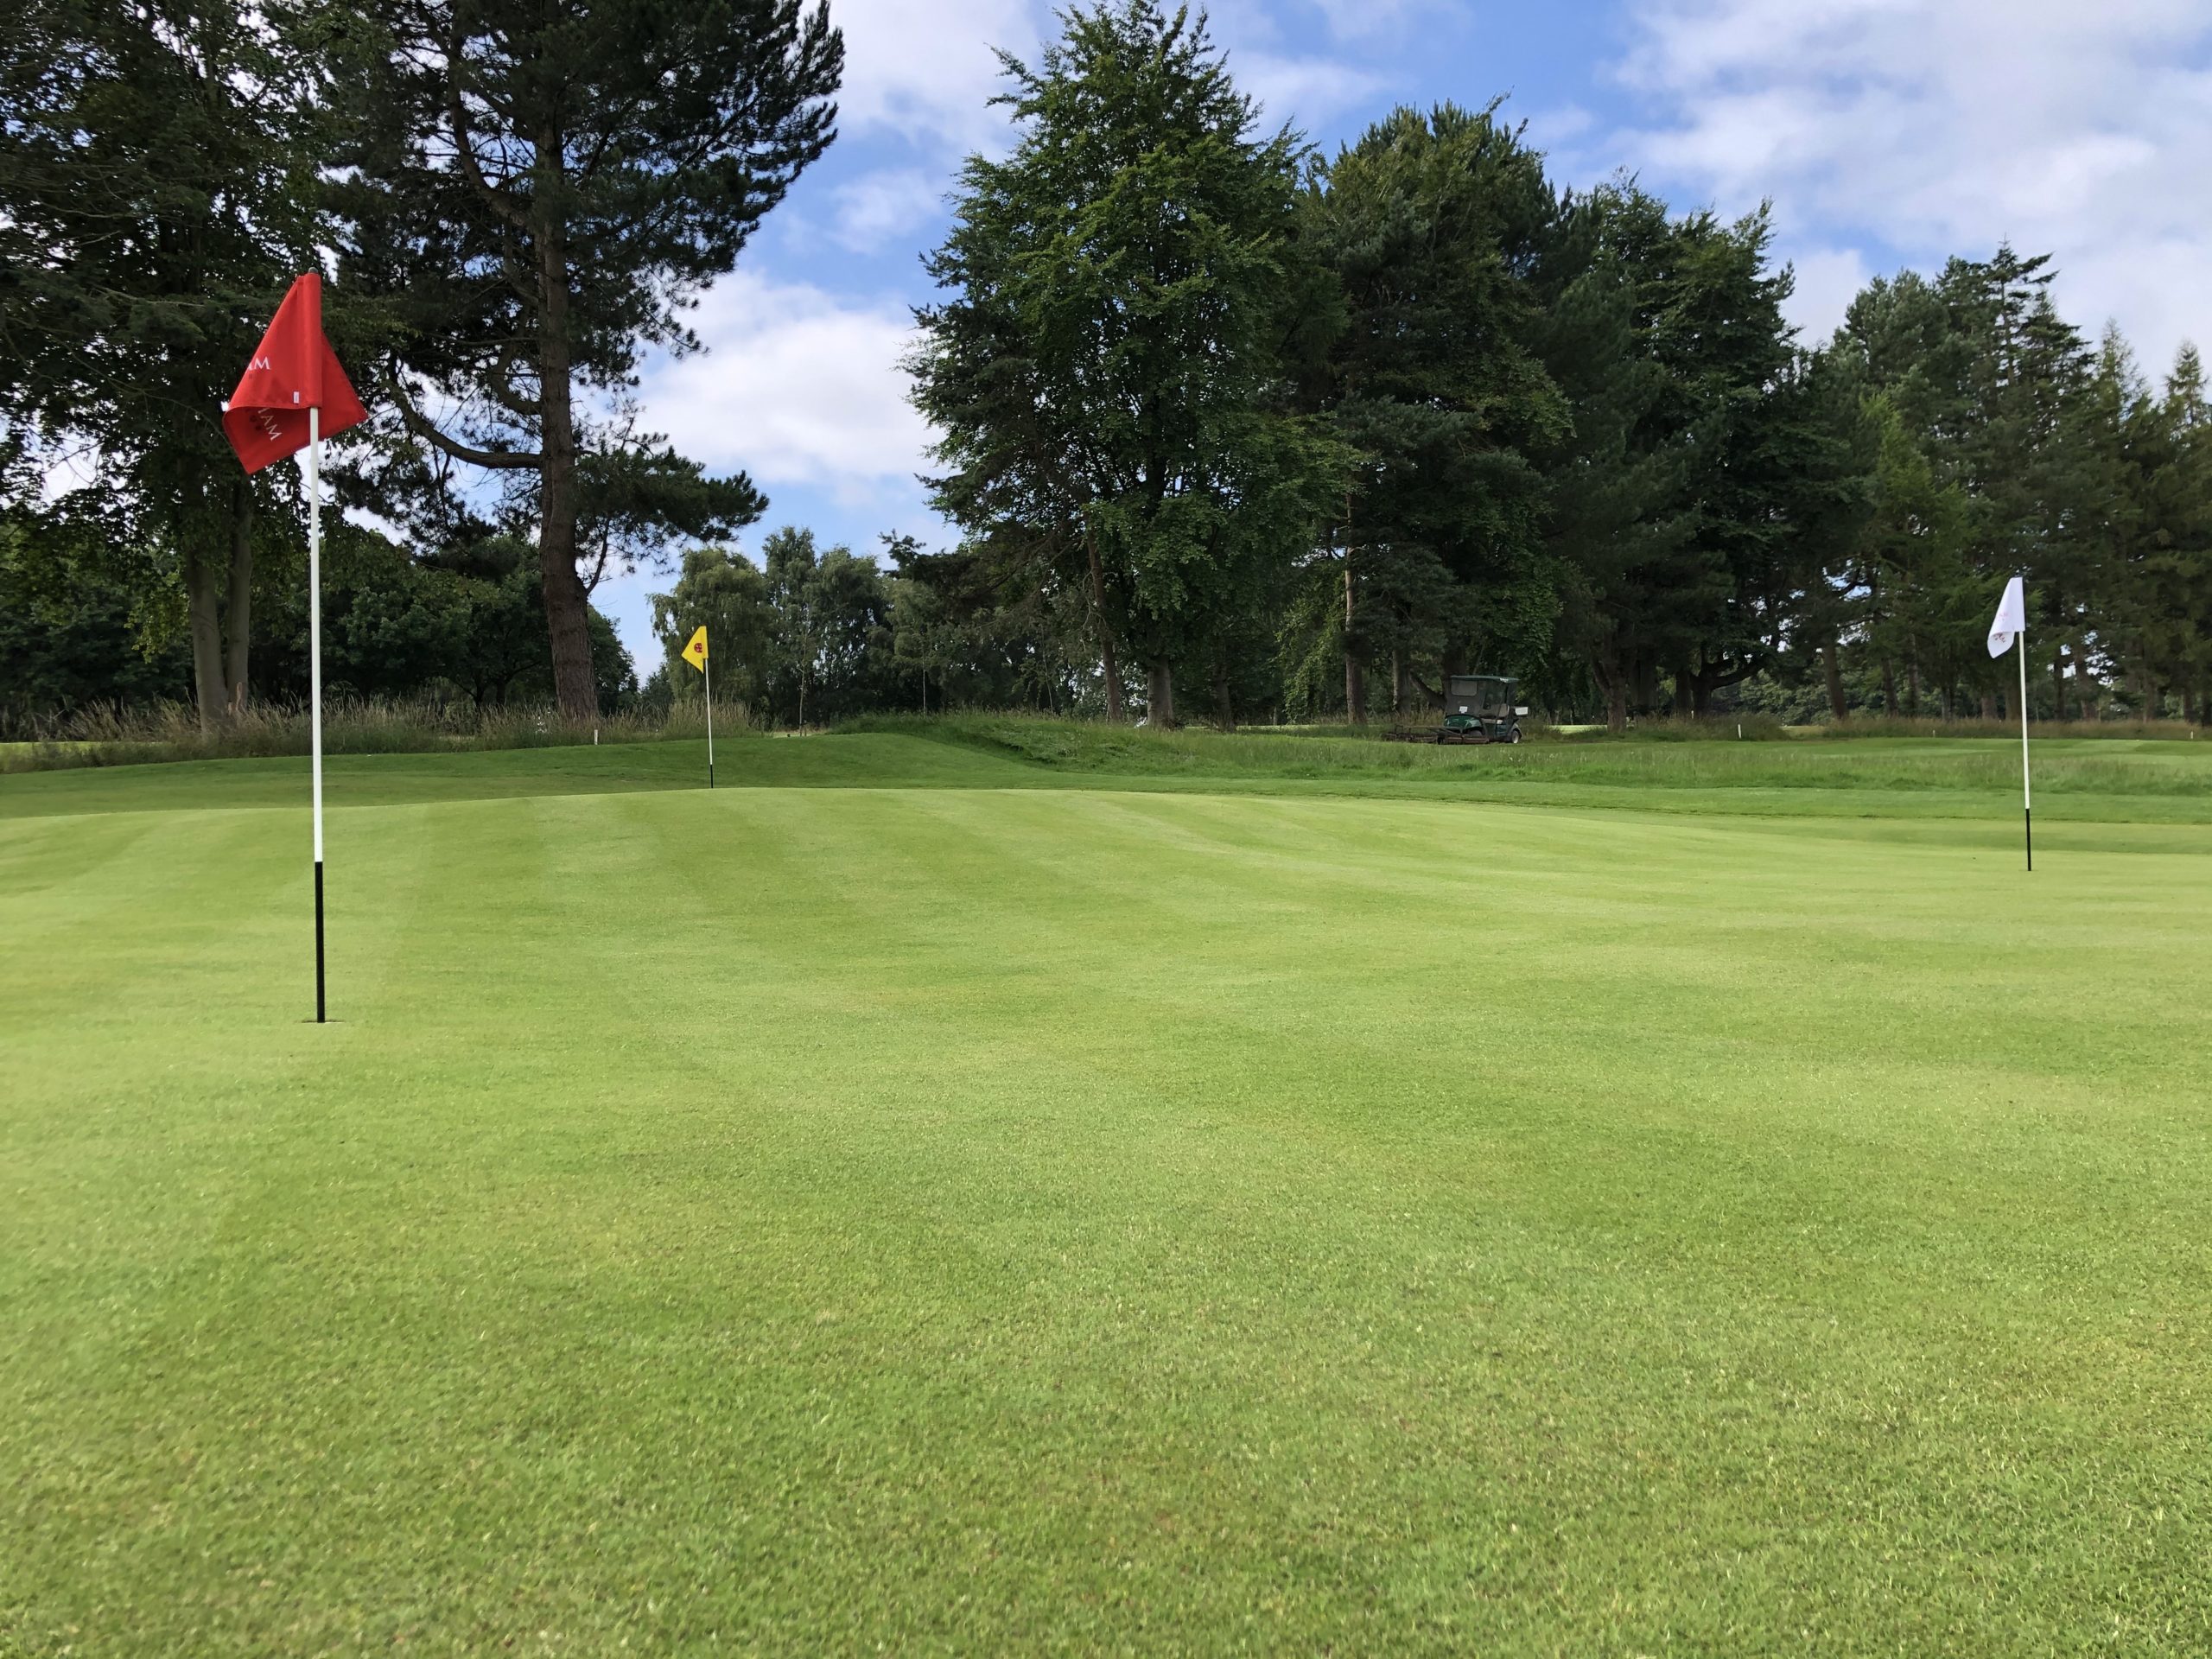 ICL’s Riptide Makes an Impact at Trentham GC